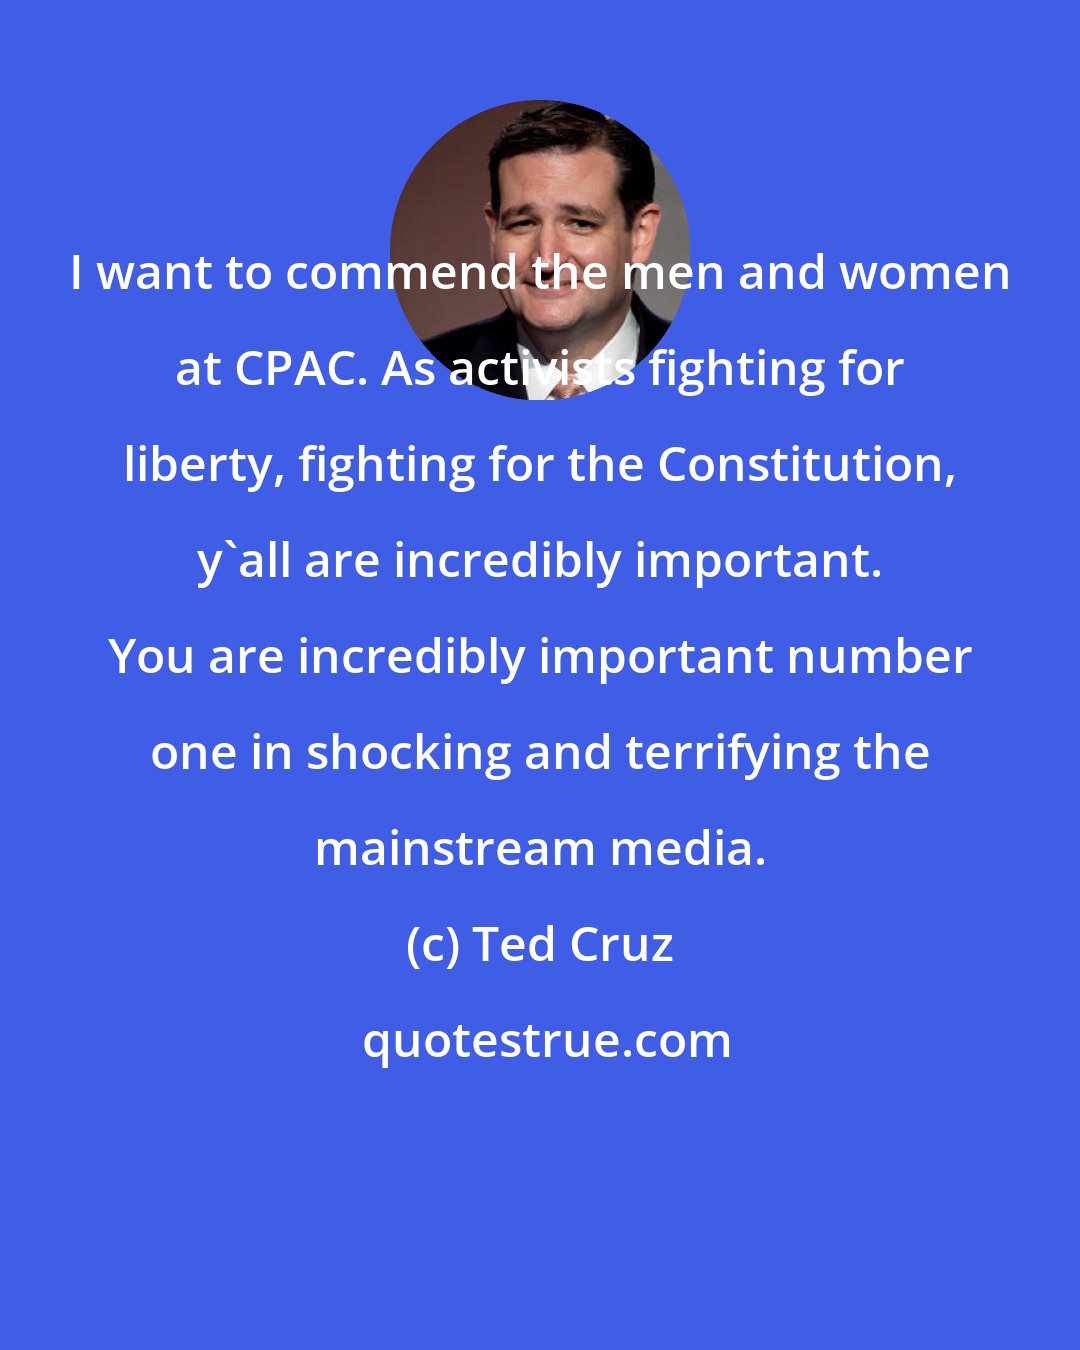 Ted Cruz: I want to commend the men and women at CPAC. As activists fighting for liberty, fighting for the Constitution, y'all are incredibly important. You are incredibly important number one in shocking and terrifying the mainstream media.